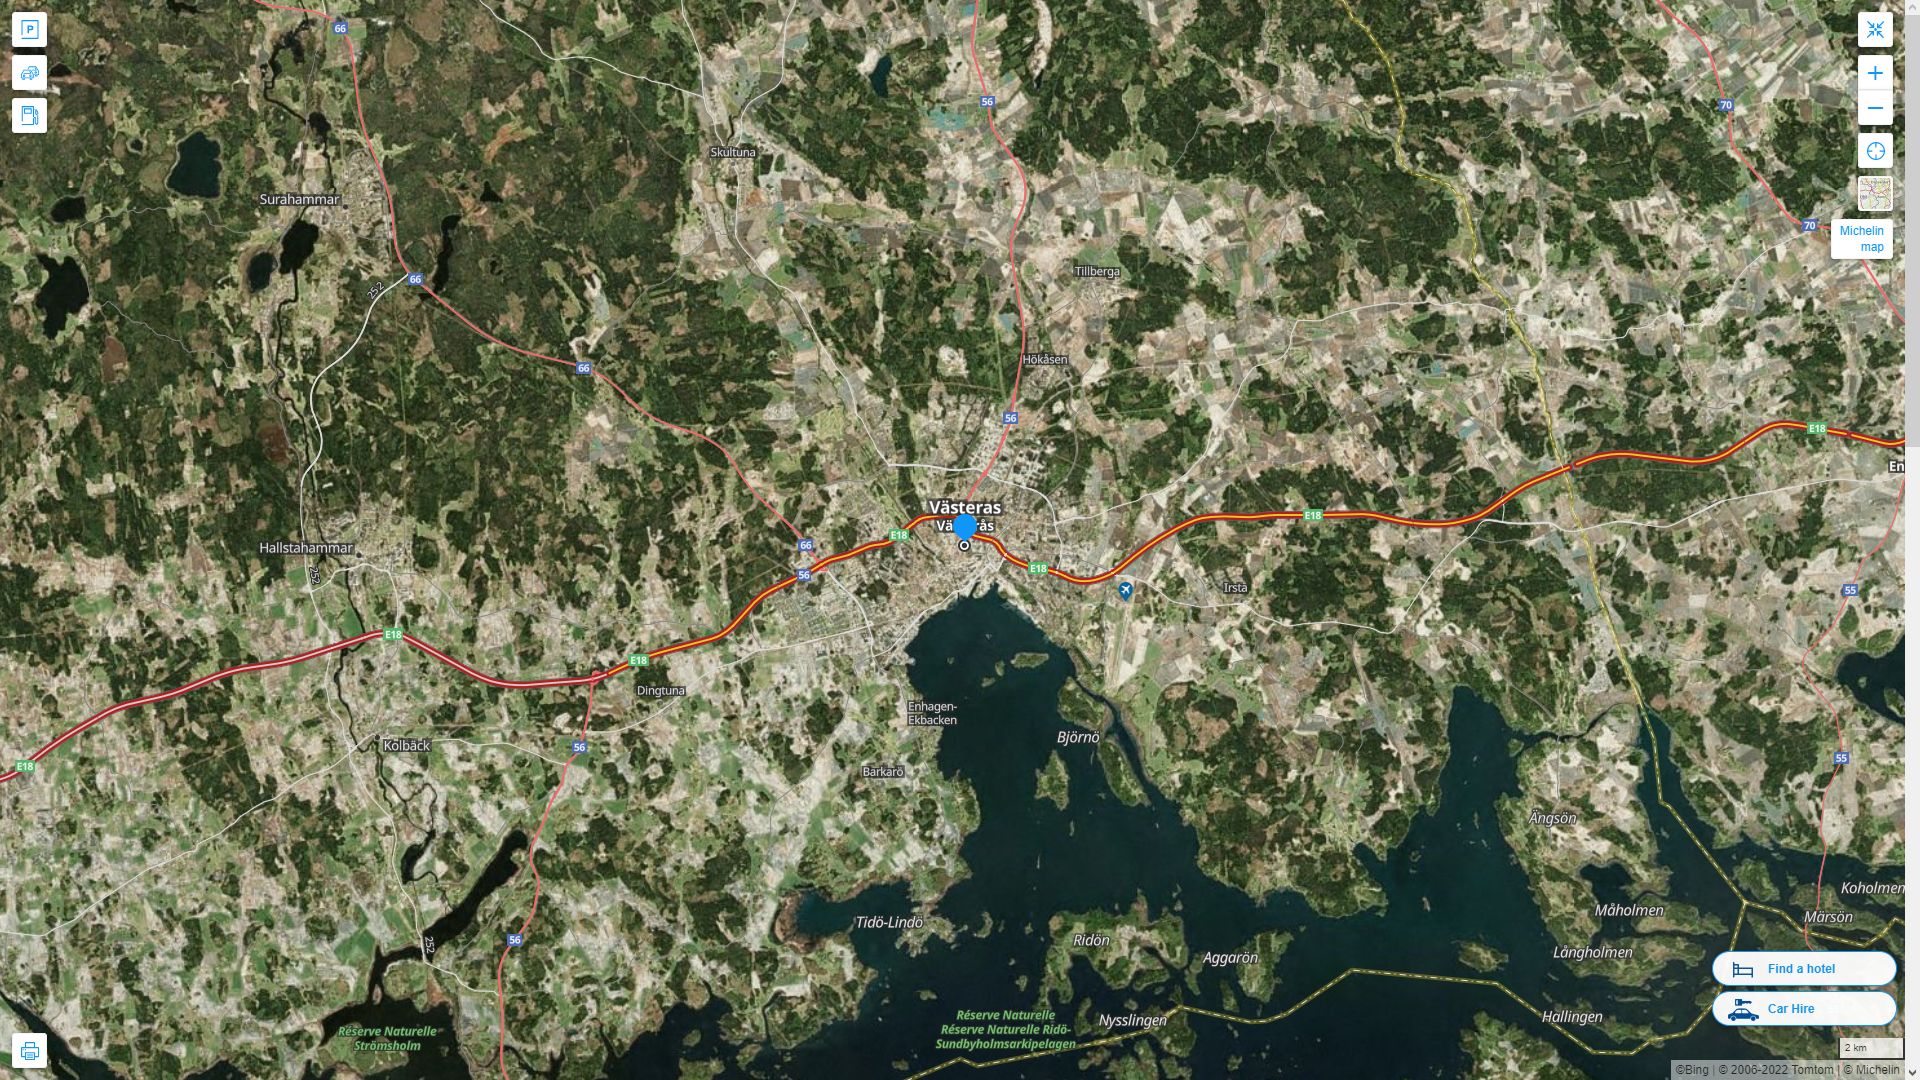 Vasteras Highway and Road Map with Satellite View